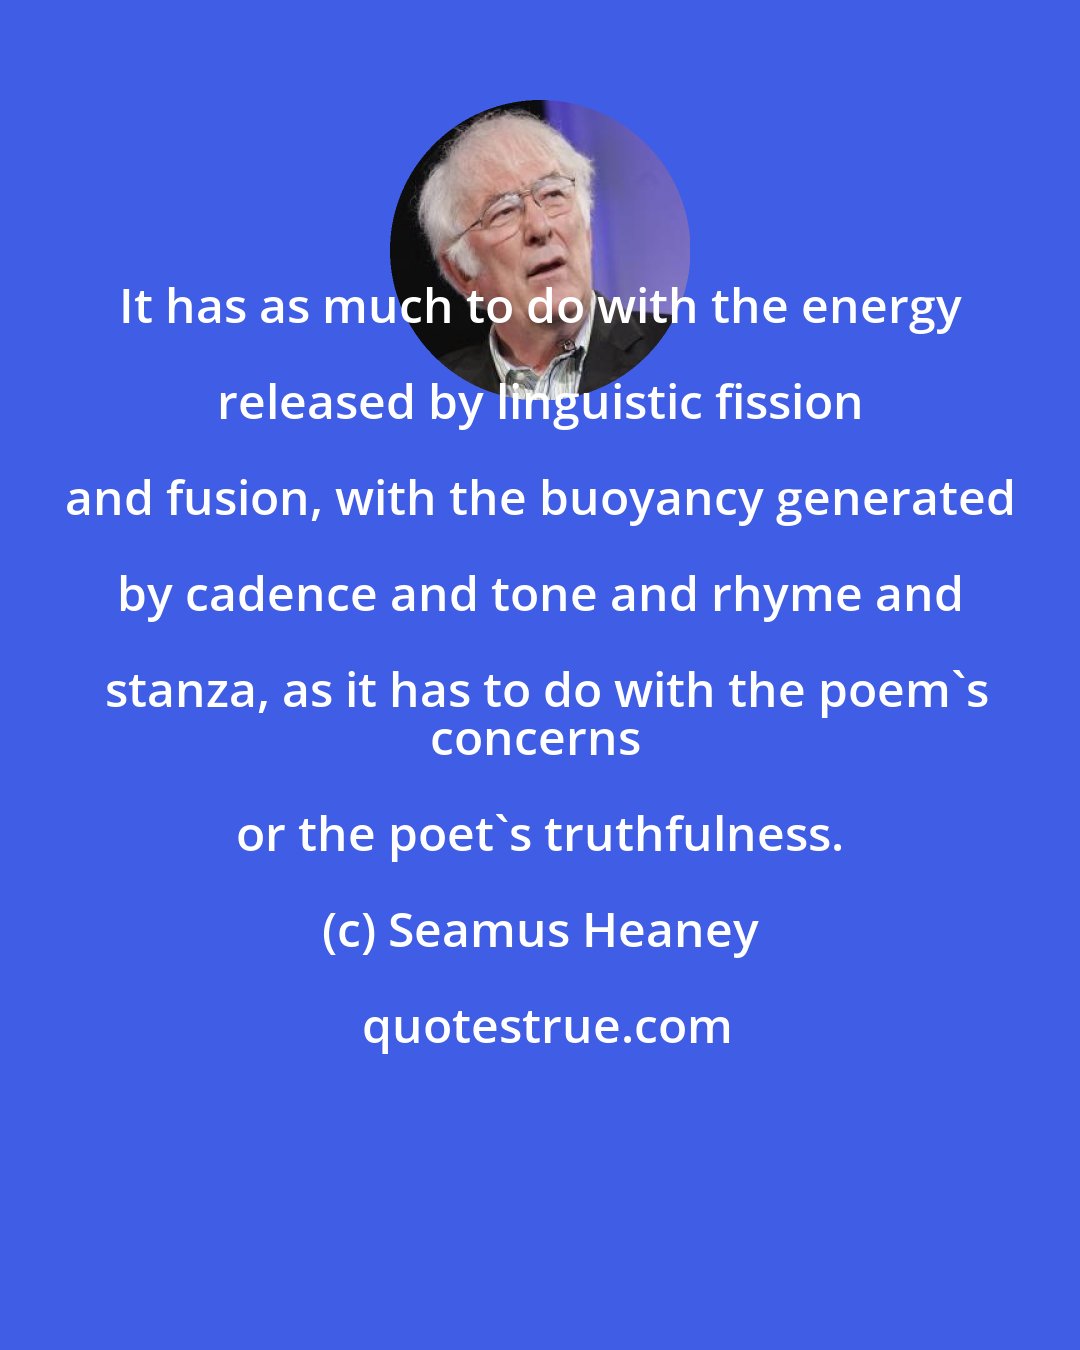 Seamus Heaney: It has as much to do with the energy released by linguistic fission and fusion, with the buoyancy generated by cadence and tone and rhyme and stanza, as it has to do with the poem's
concerns or the poet's truthfulness.